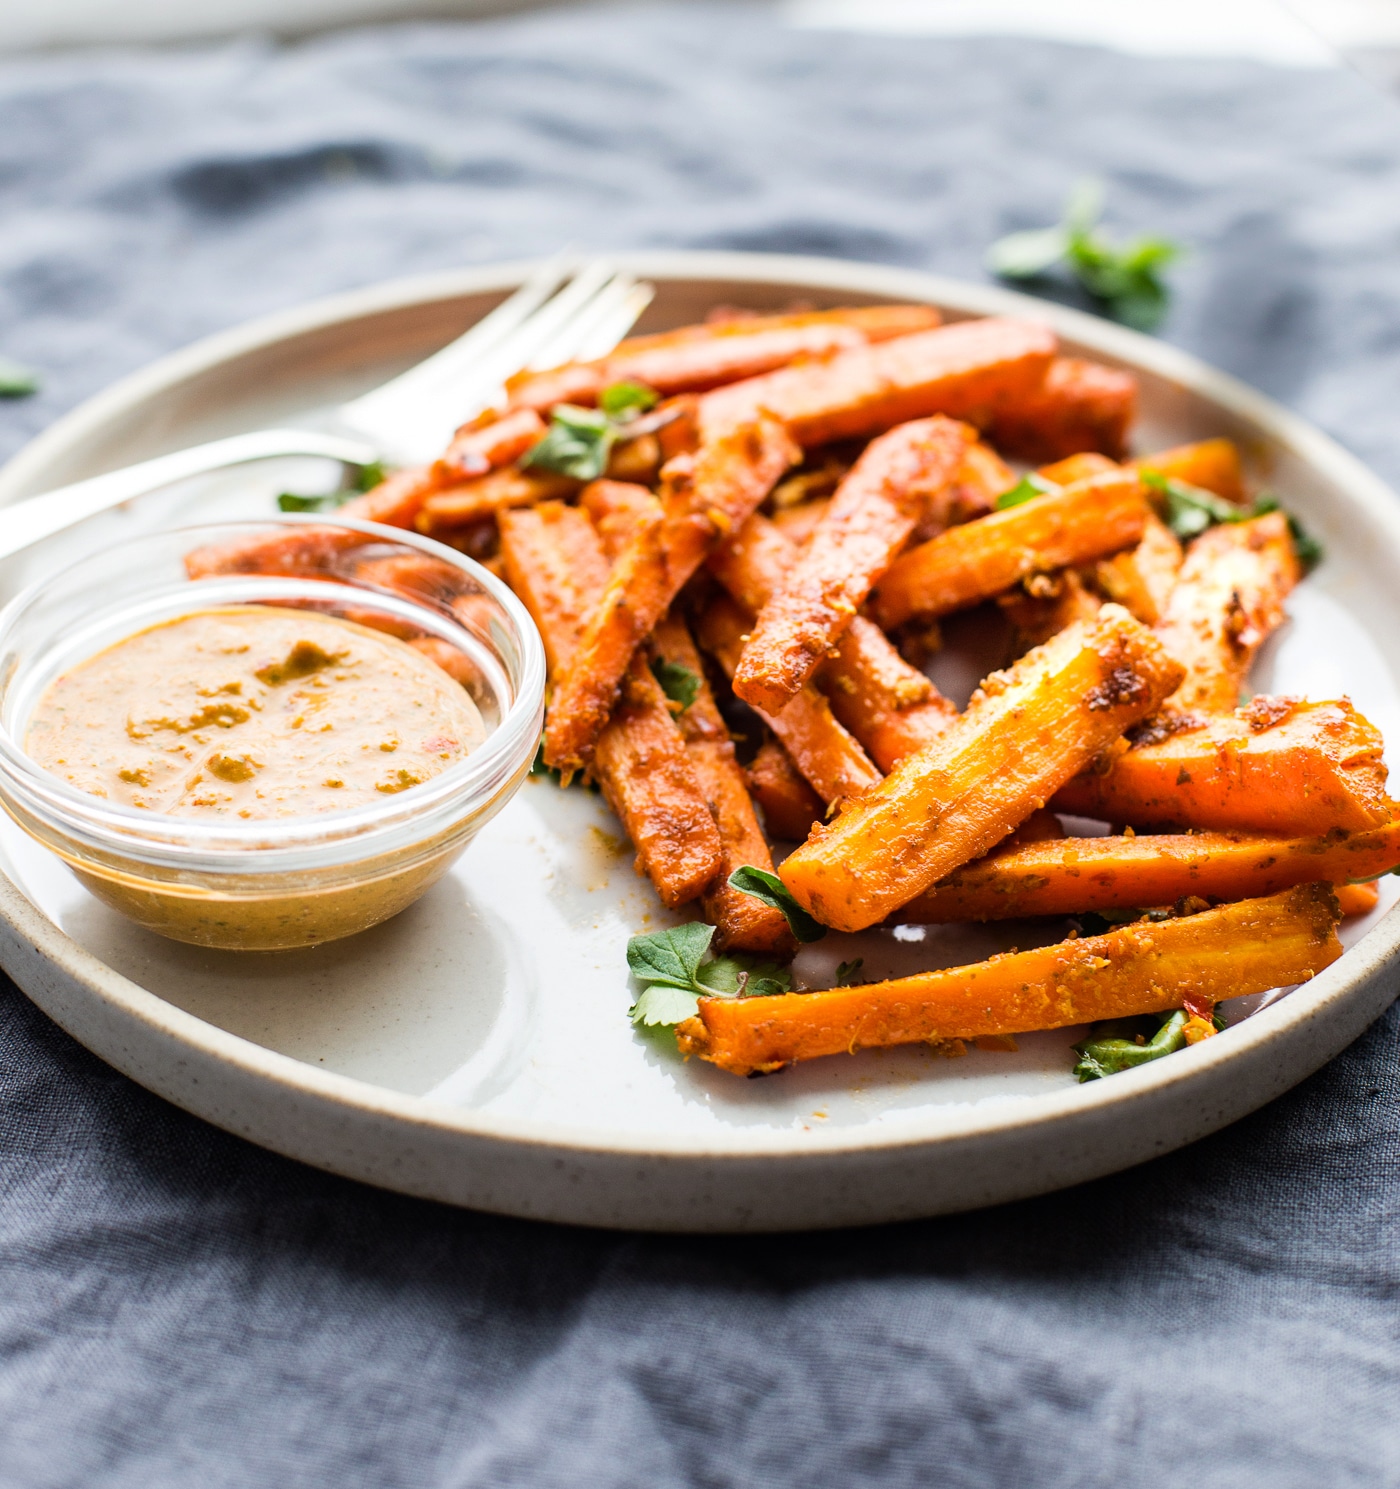 Oven baked carrot fries cooked in a homemade Peri Peri Sauce. Flavorful Crispy carrot fries that make an easy paleo appetizer. Vegan, whole 30 friendly.